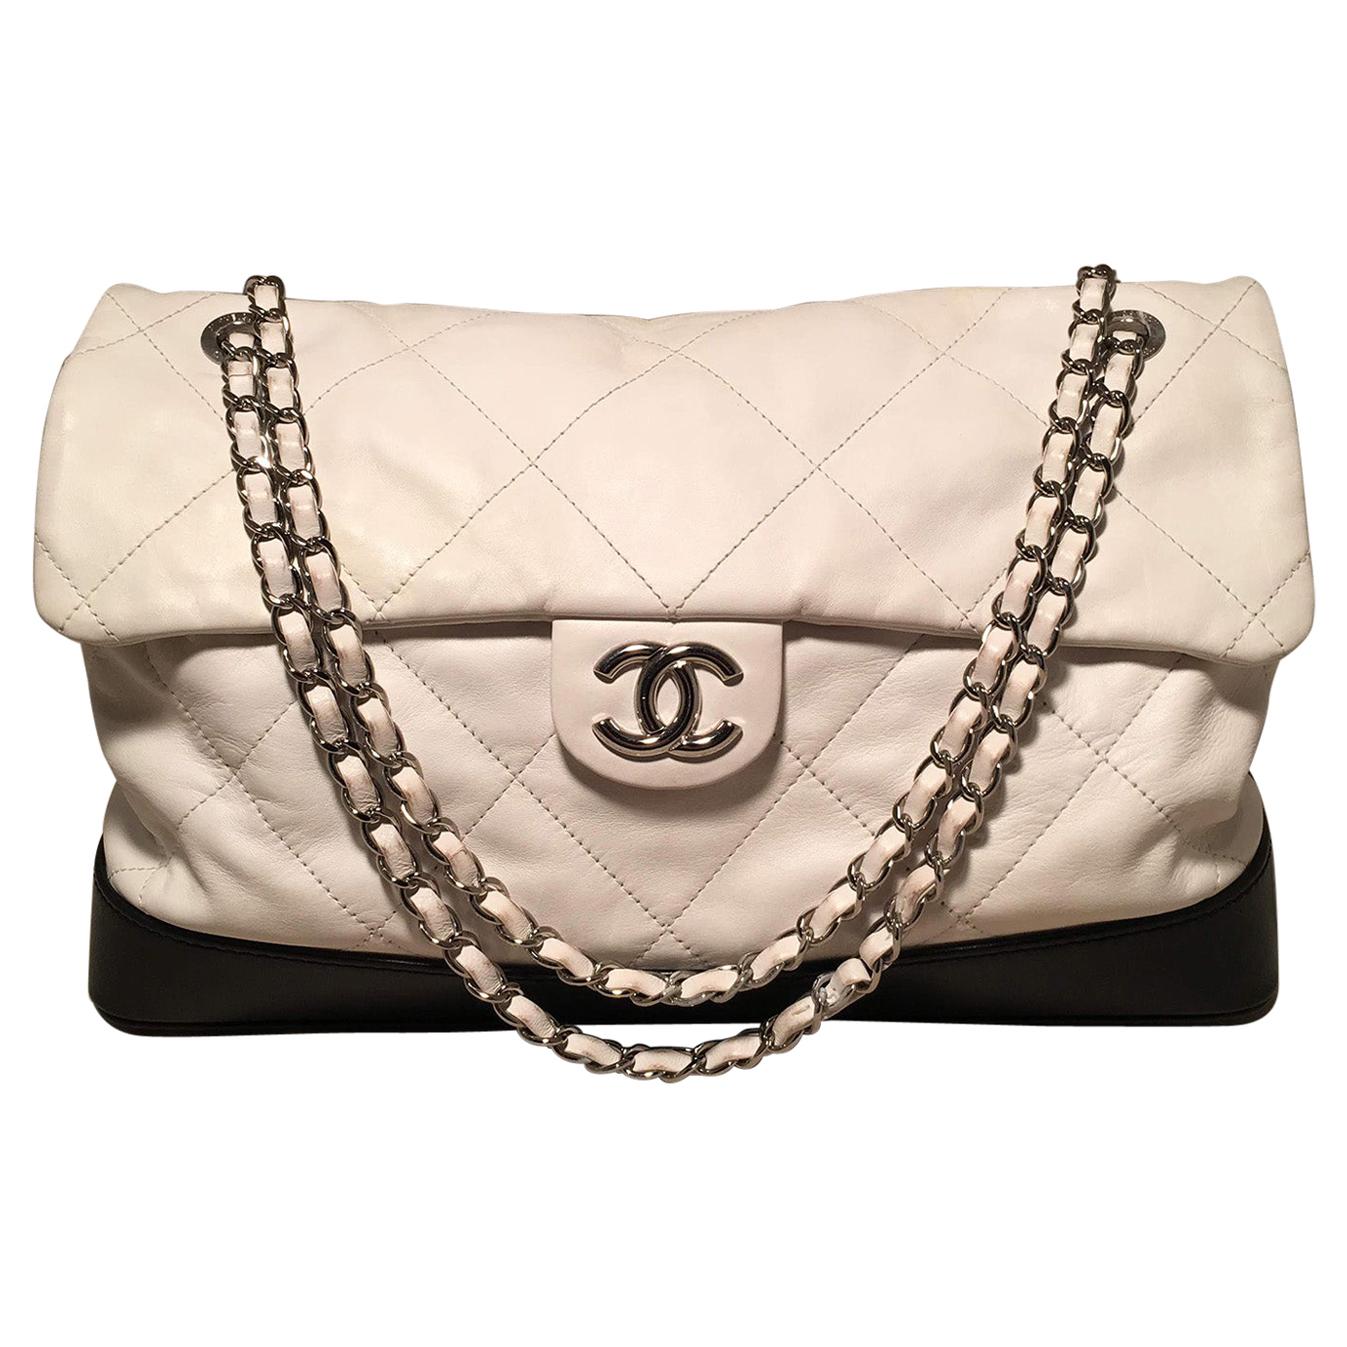 Chanel Black and White Quilted leather XL Classic Flap Shoulder Bag